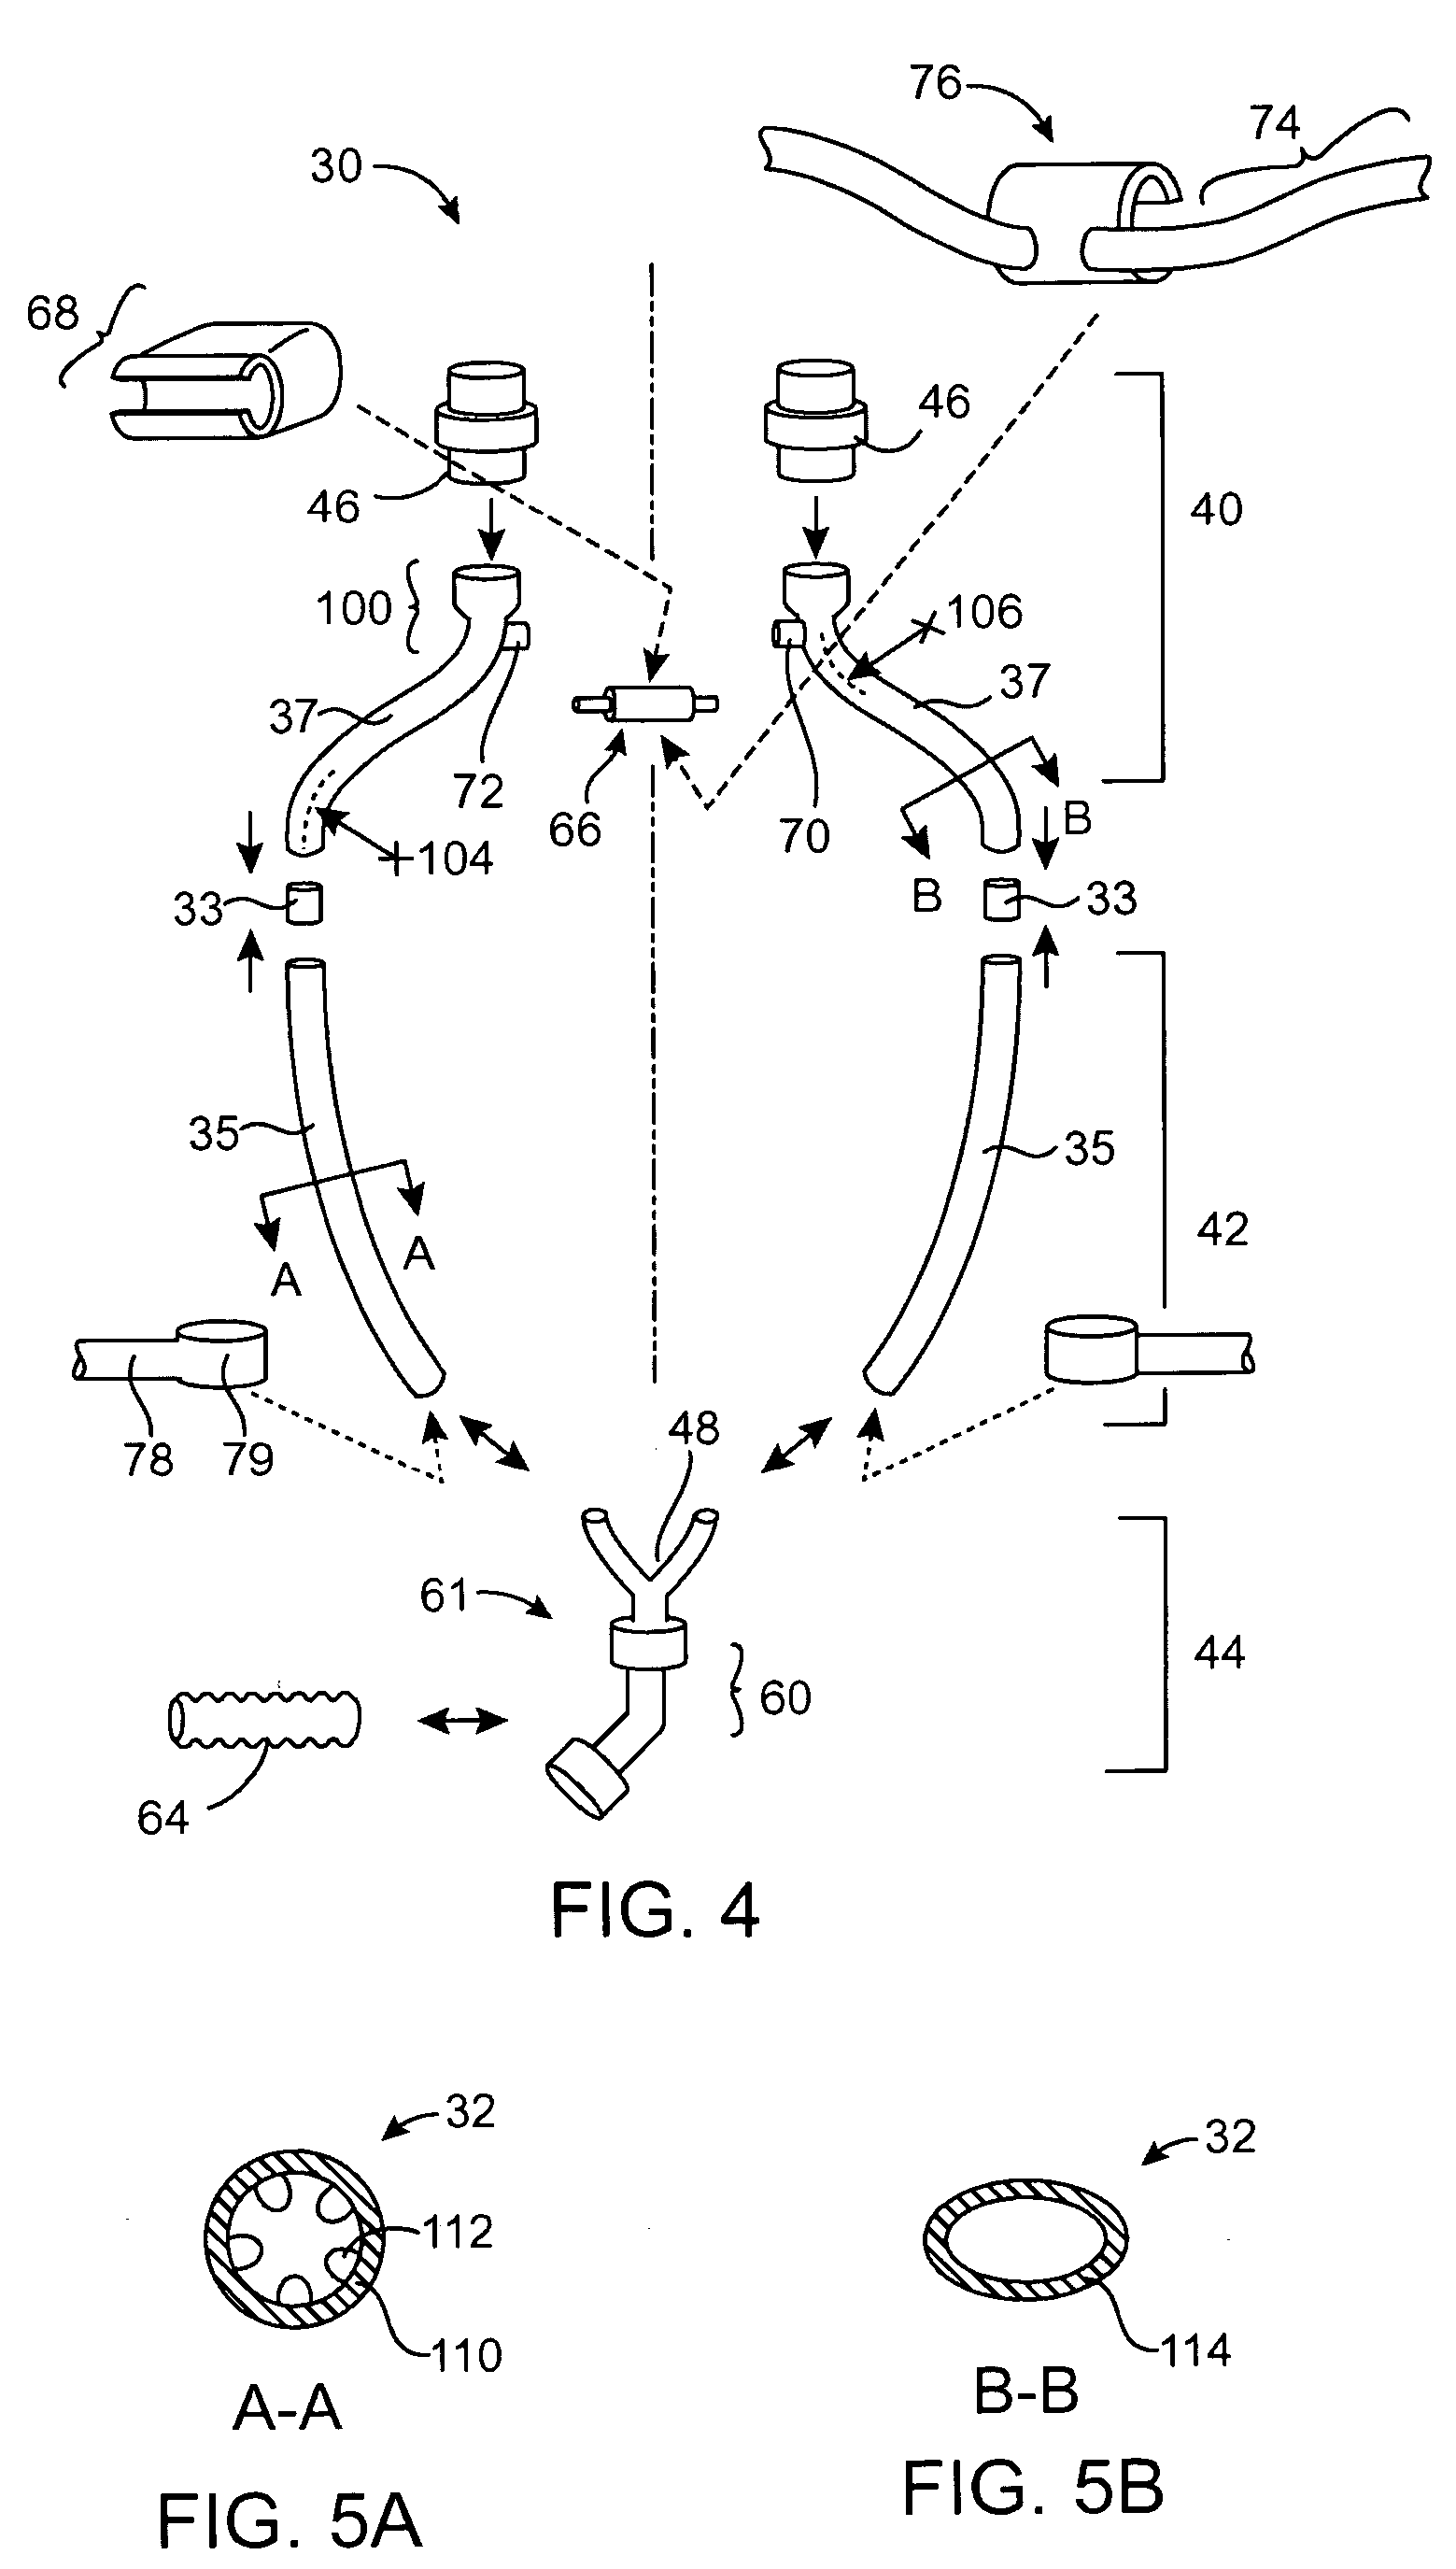 Method and device for non-invasive ventilation with nasal interface